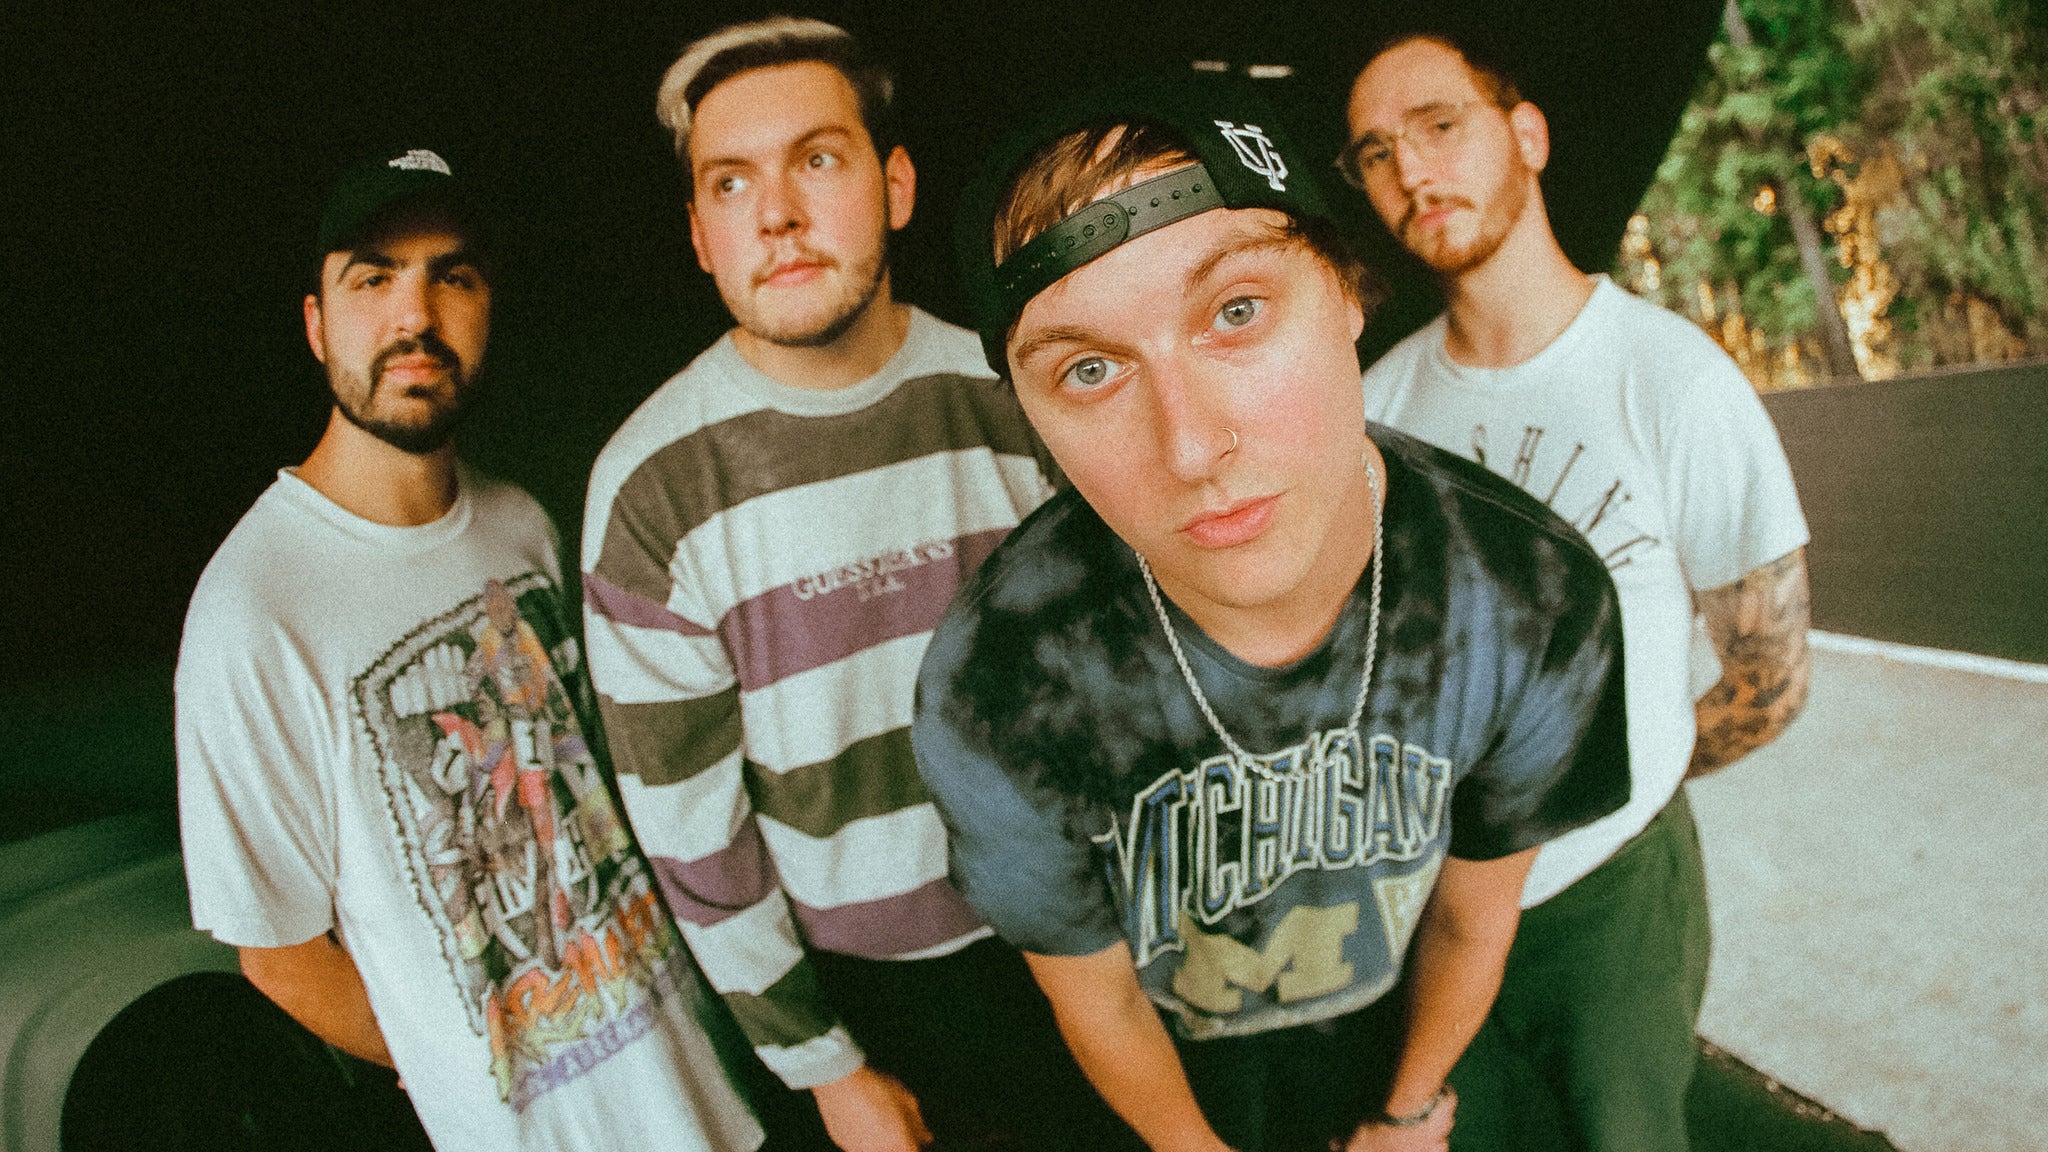 State Champs in Richmond promo photo for Exclusive presale offer code